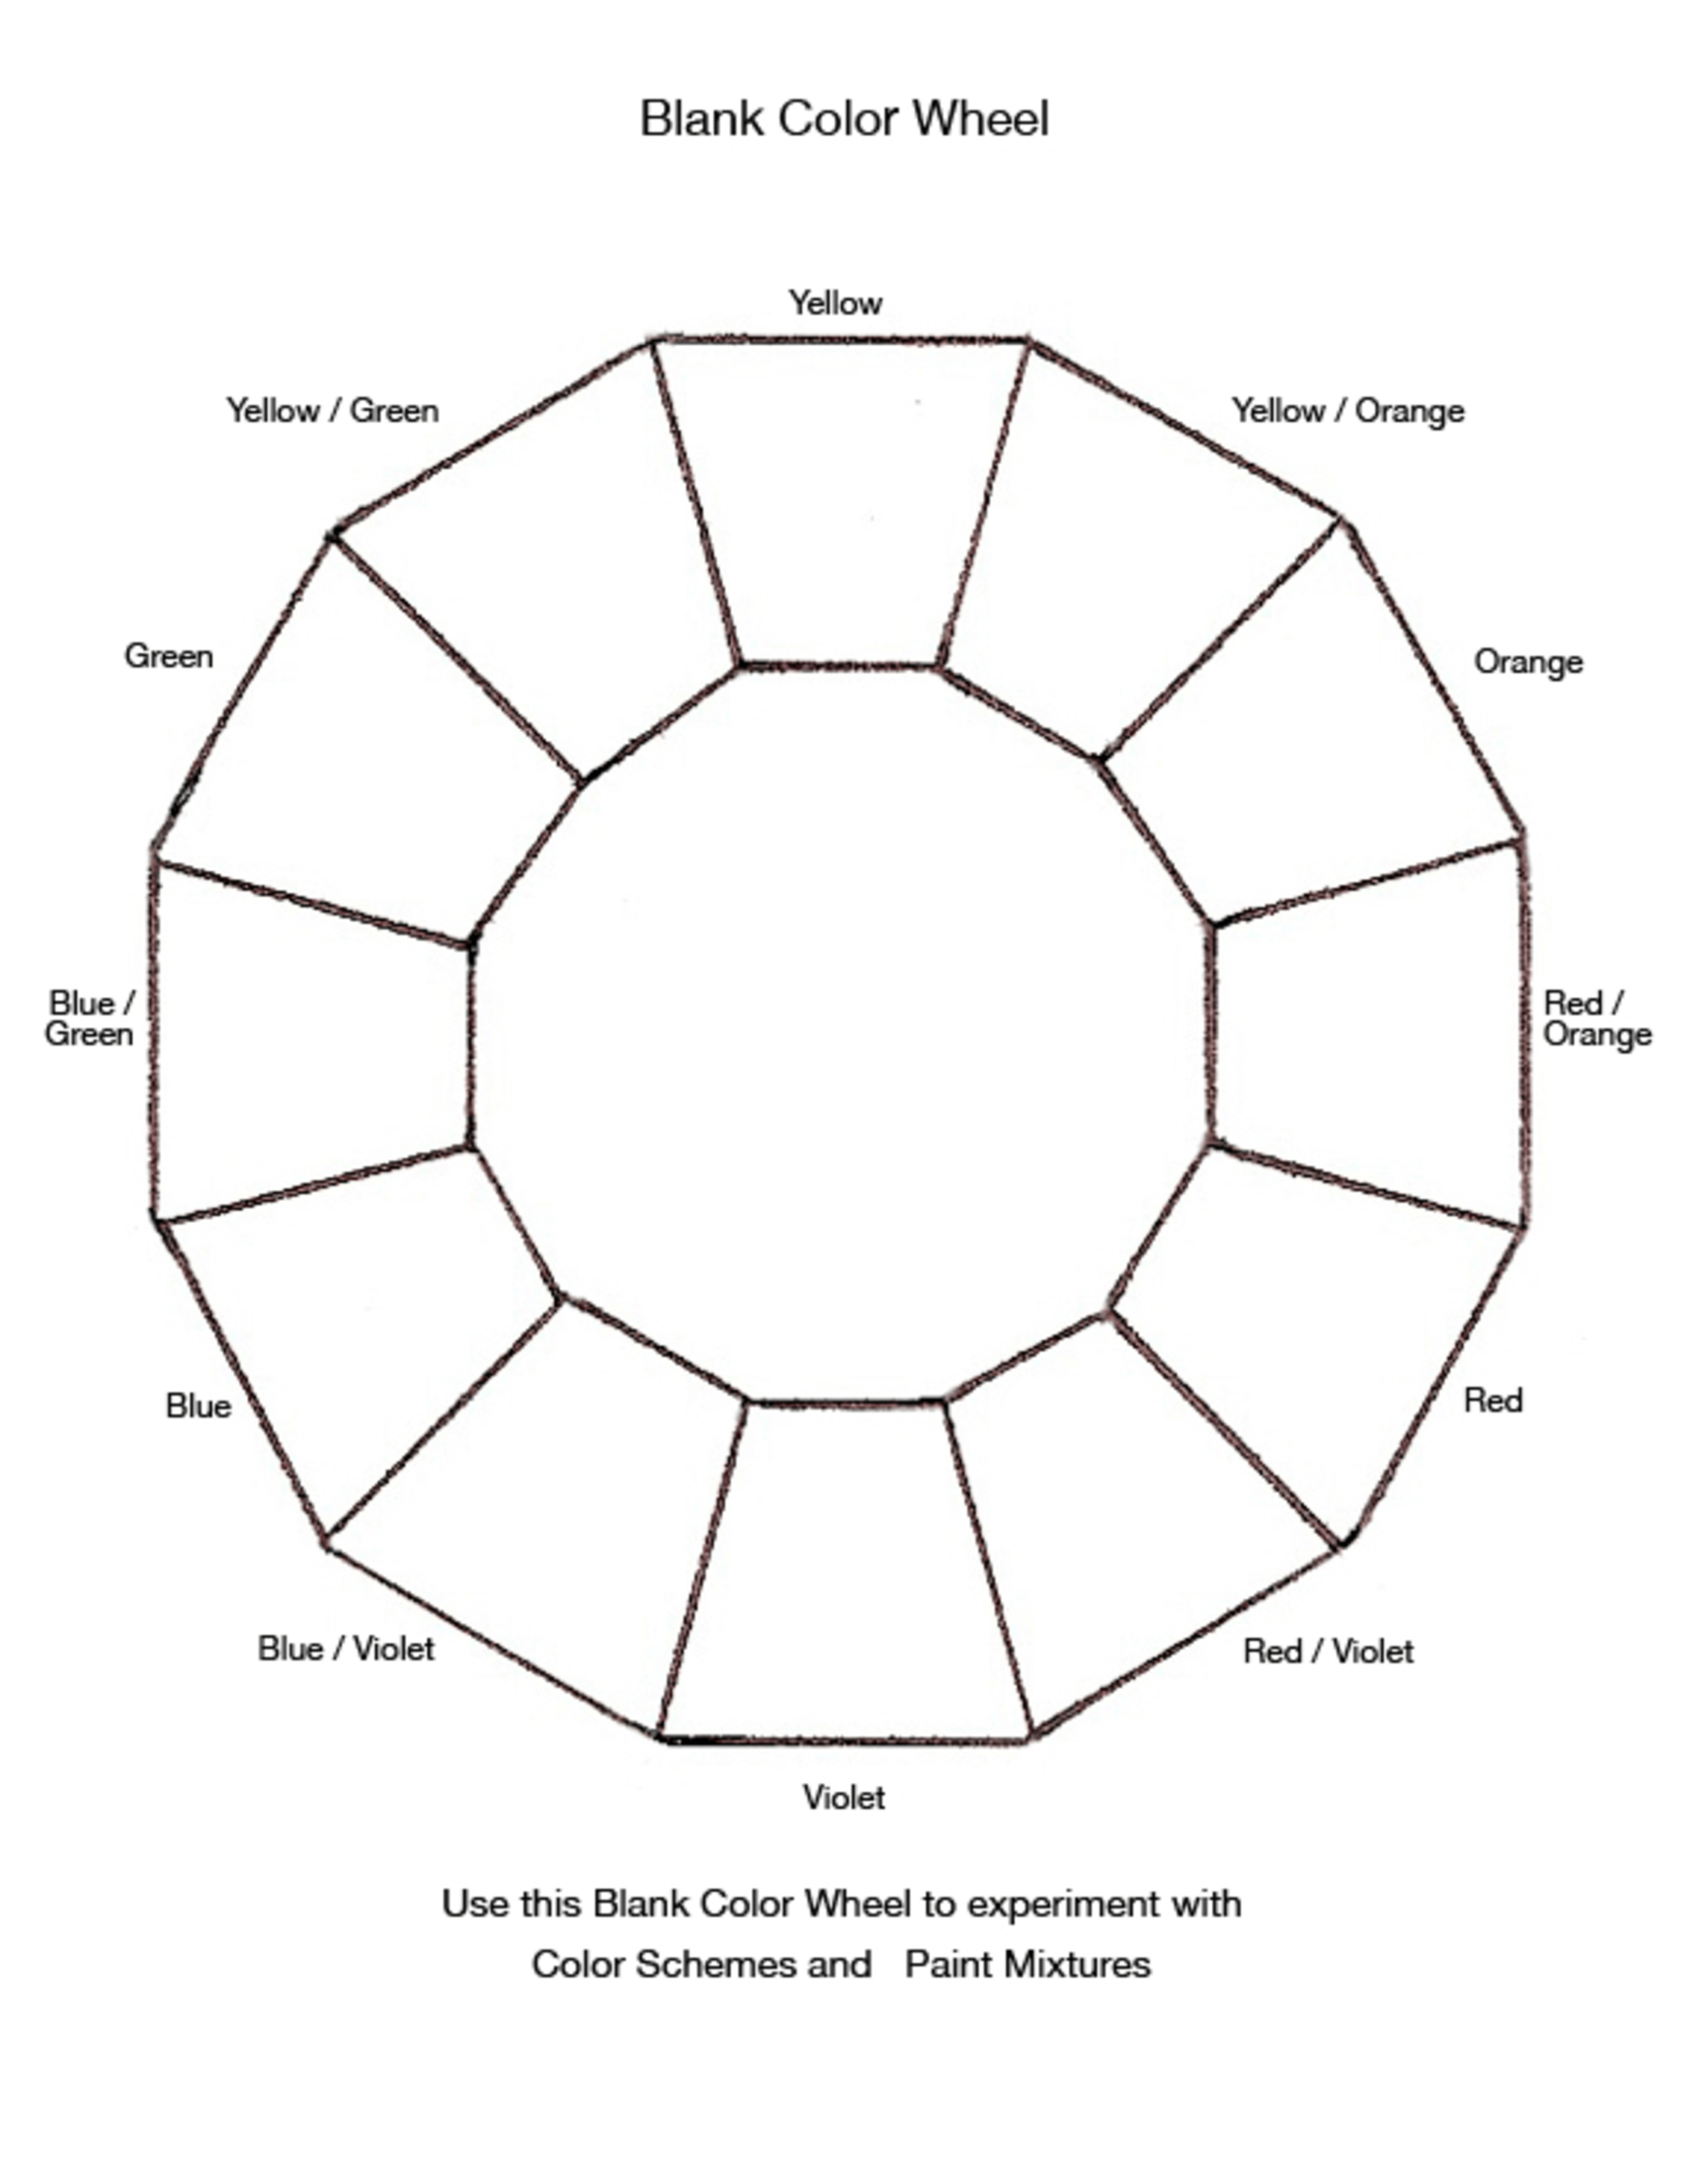 Blank Color Wheel Chart | Templates At Allbusinesstemplates With Regard To Blank Wheel Of Life Template